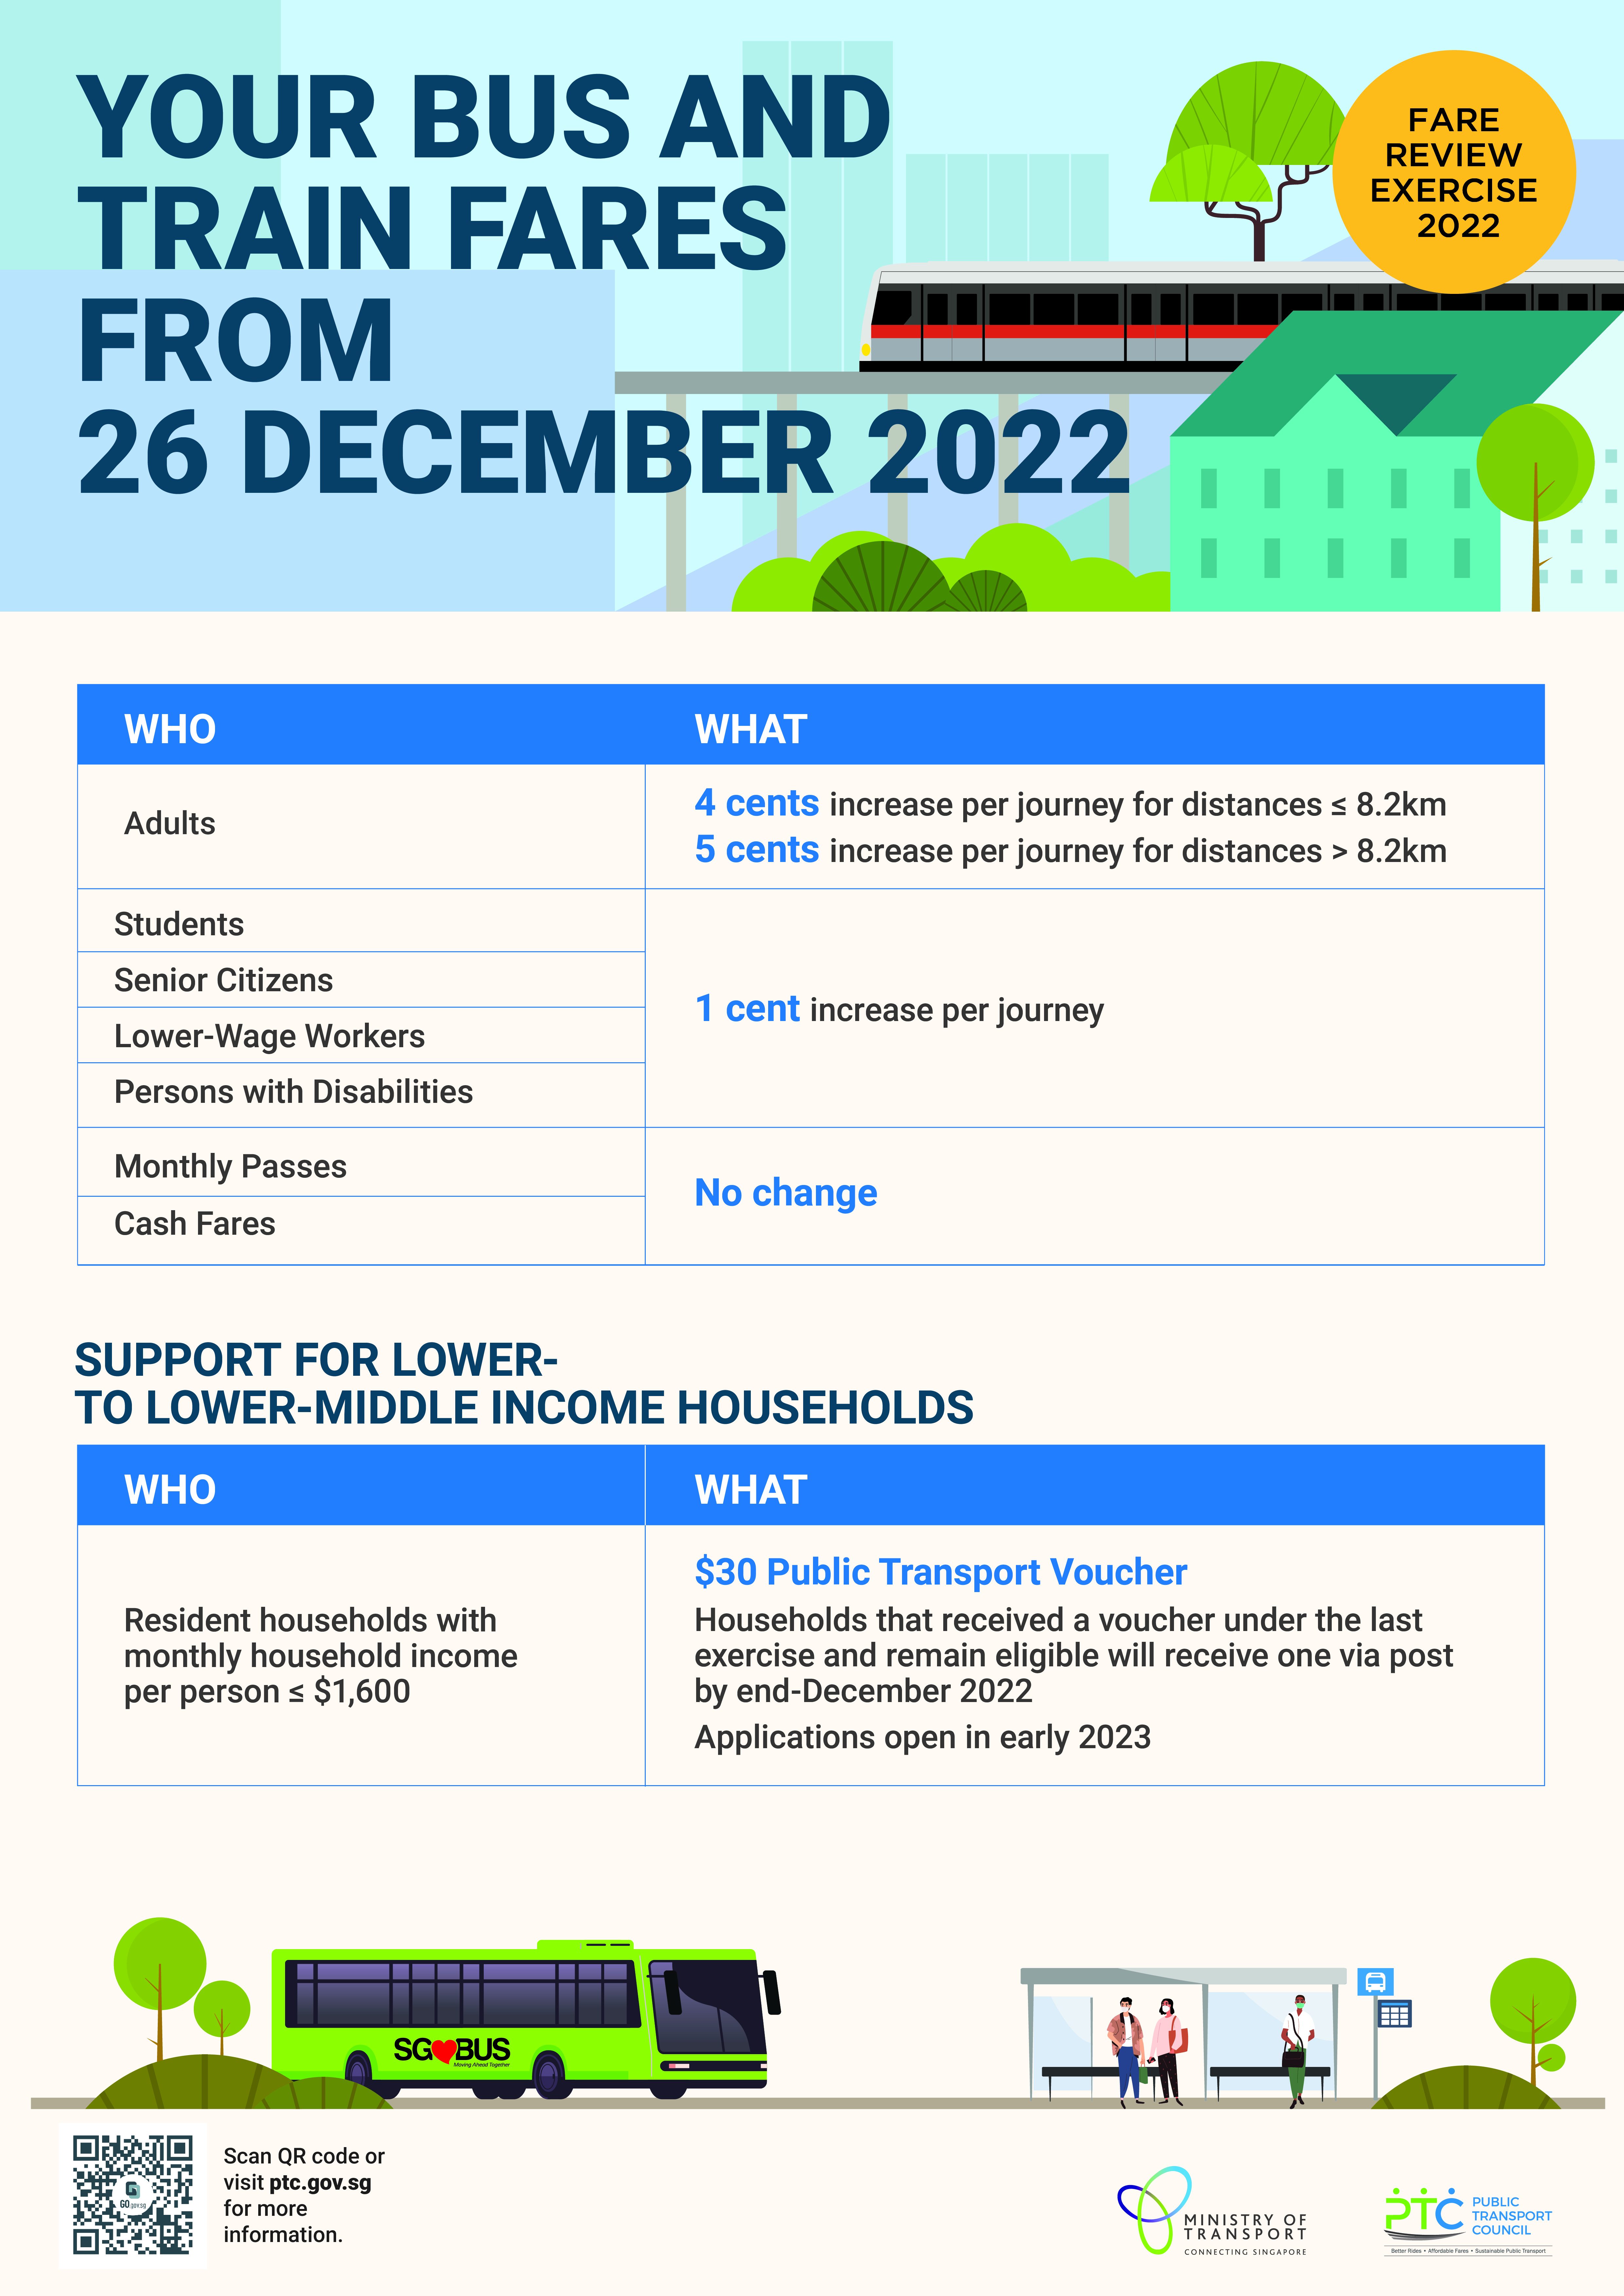 Changes To Your Bus And Train Fares w.e.f. 26 December 2022